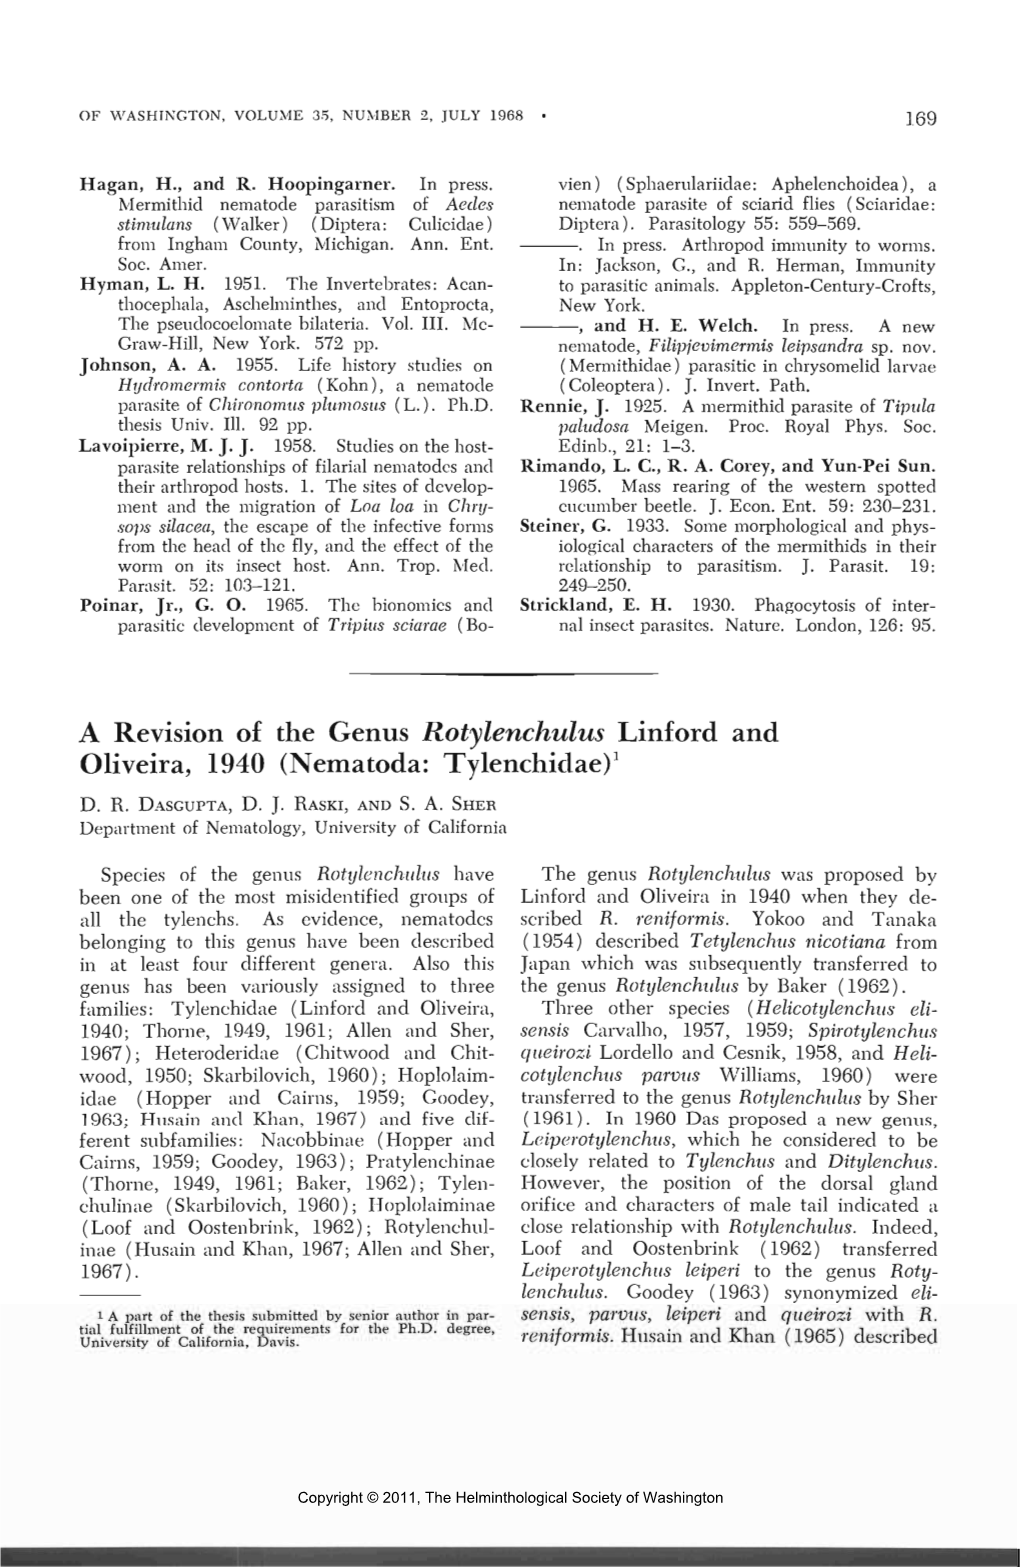 A Revision of the Genus Rotylenchulus Liiiford and Oliveira, 1940 (Nematoda: Tylenchiclae)1 D